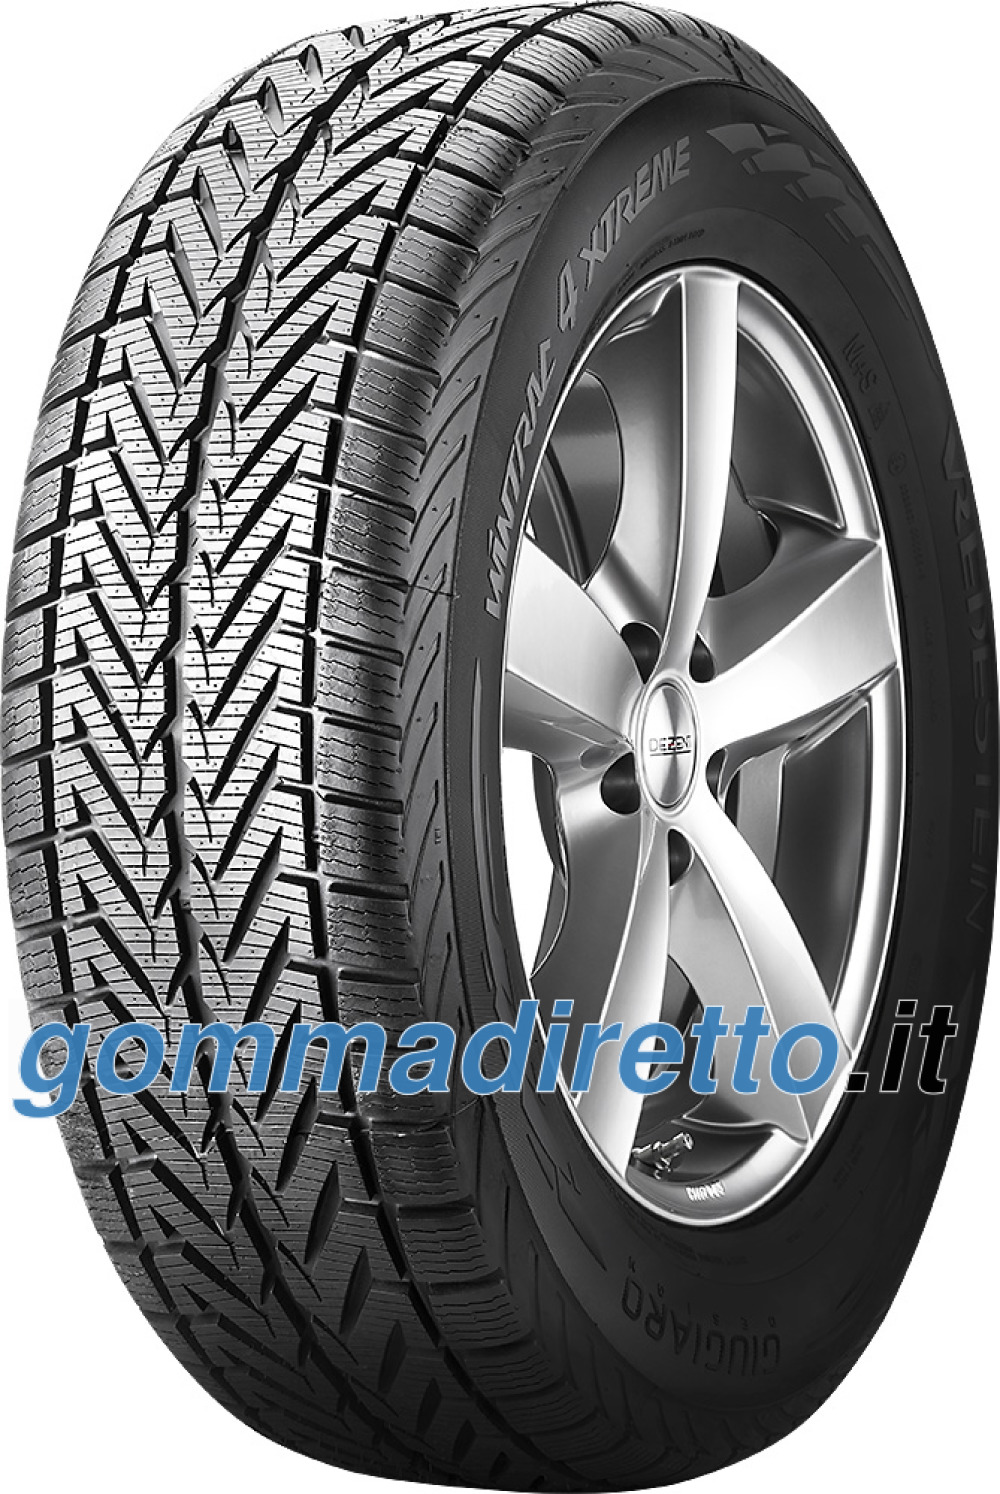 Image of Vredestein Wintrac 4 Xtreme ( 275/45 R20 110V XL )